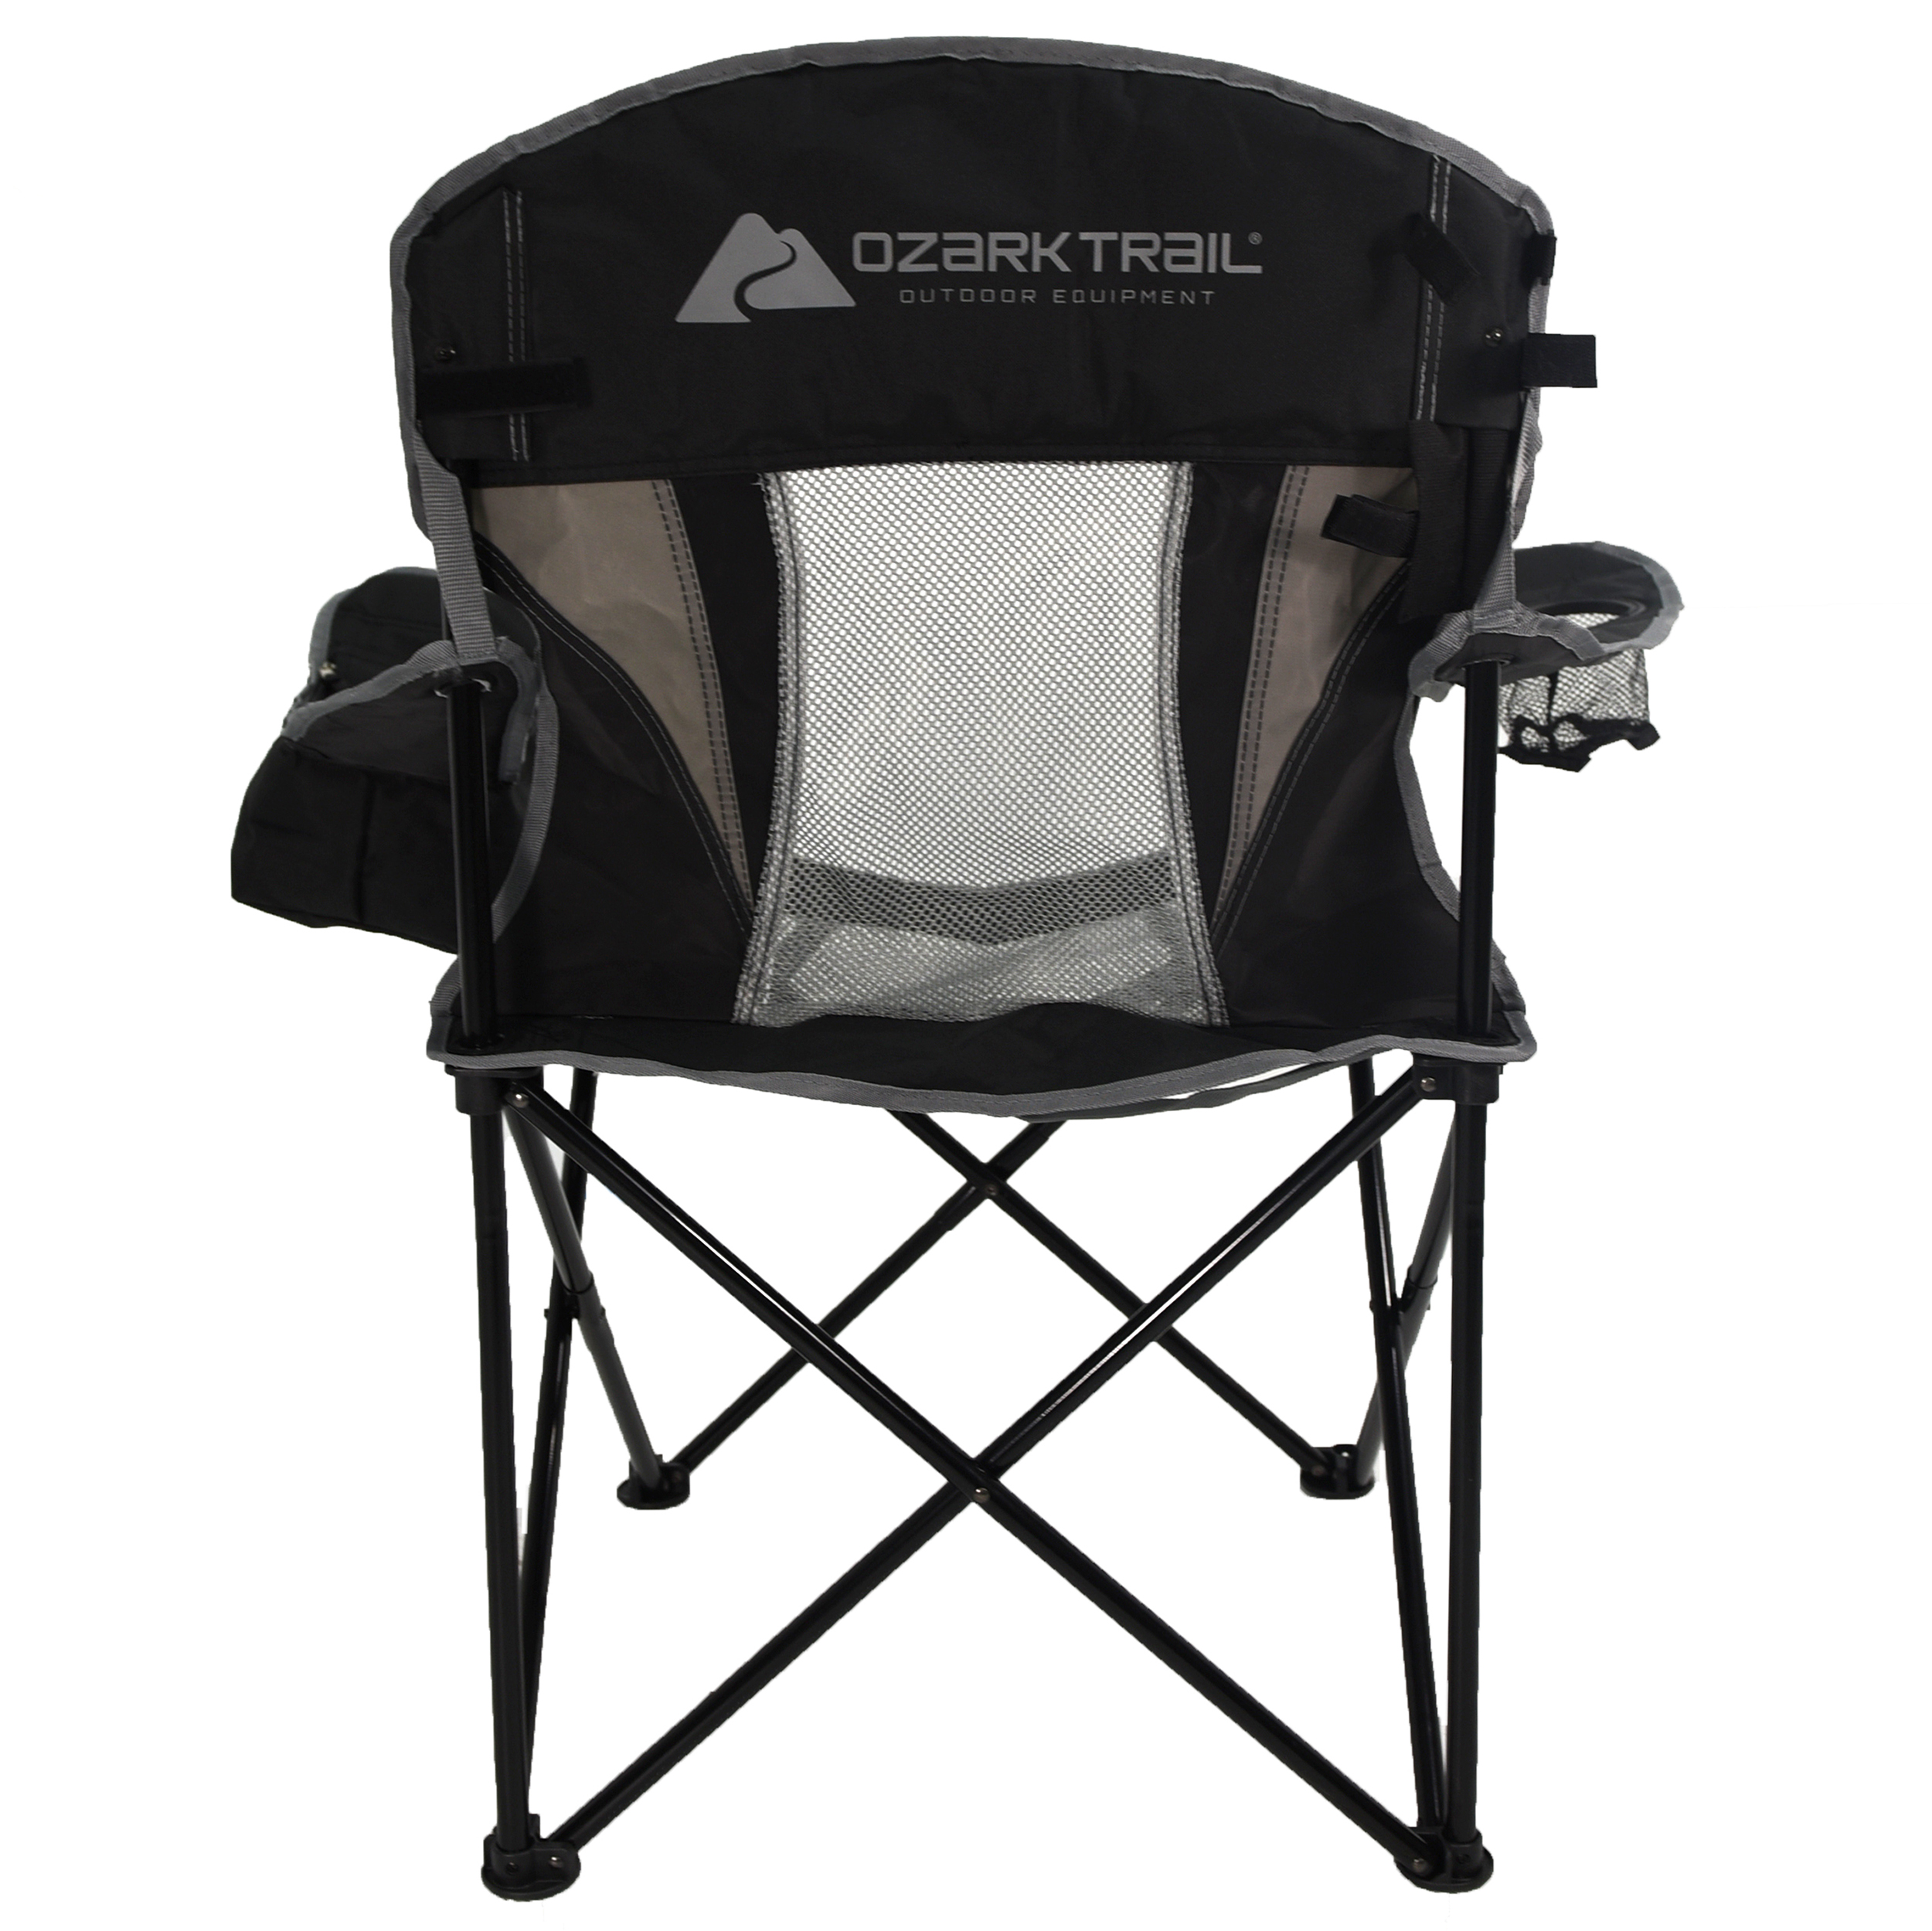 Ozark Trail Camping Chair, Black and Gray - image 3 of 9